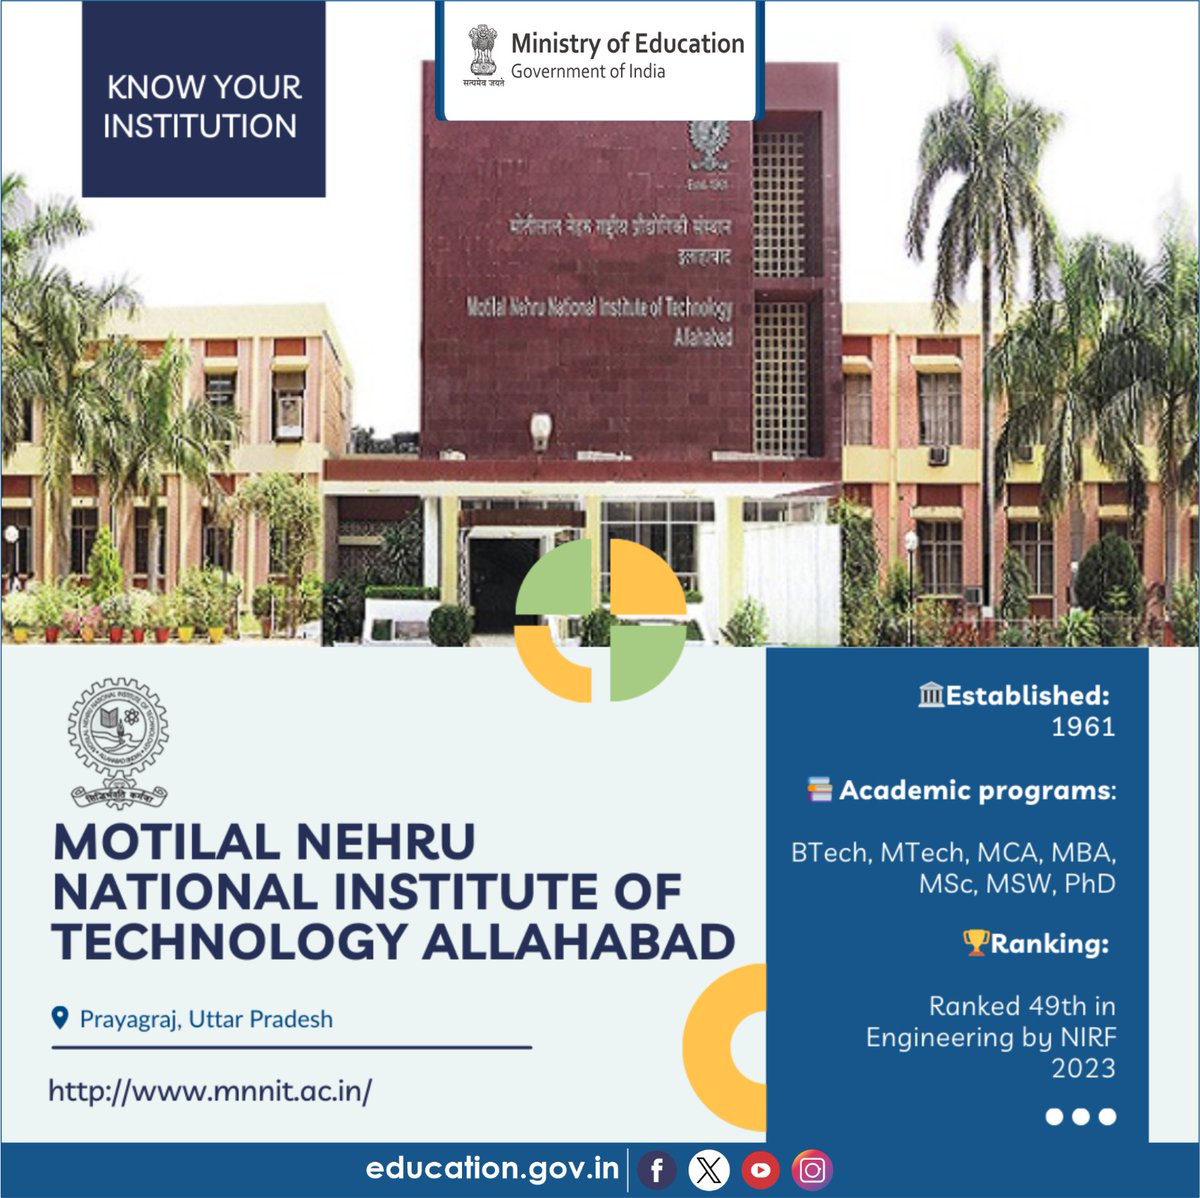 Know about the HEIs of India!

Motilal Nehru National Institute of Technology (MNNIT) Allahabad, Prayagraj is an Institute with a total commitment to quality and excellence in academic pursuits. Established in 1961 as one of India's seventeen Regional Engineering Colleges, MNNIT…